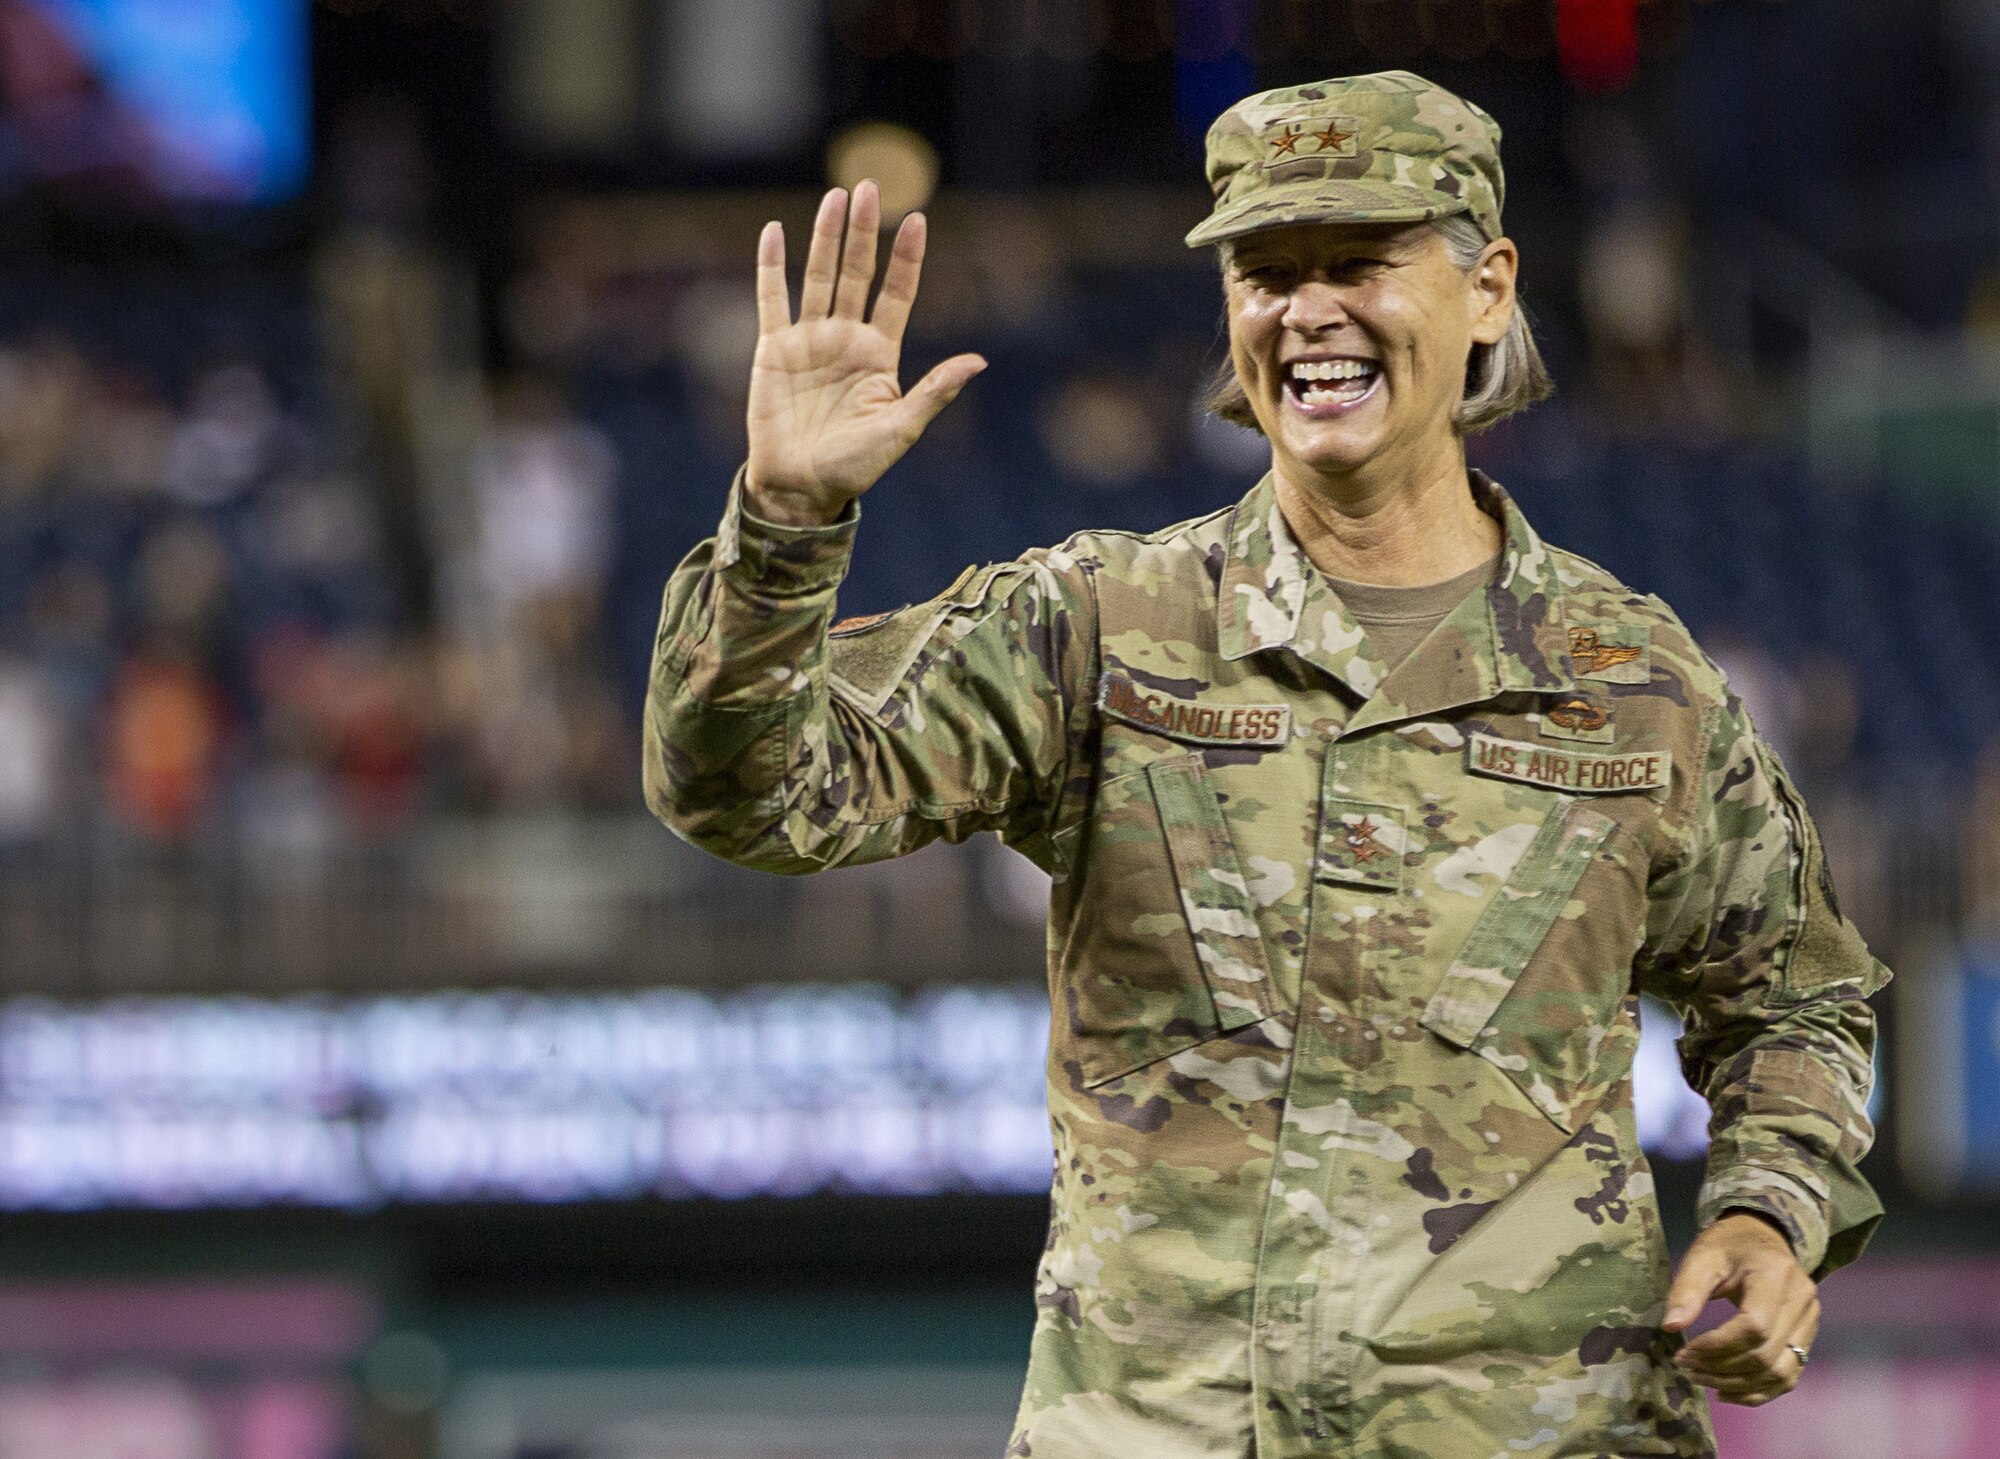 Air Force Maj. Gen. Sherrie McCandless, commanding general of the District of Columbia National Guard, waves to the crowd after throwing the ceremonial first pitch during National Guard Day at Nationals Park in Washington, Aug. 13, 2021. The Washington Nationals dedicate a special game each season to honor and celebrate each branch of the military.